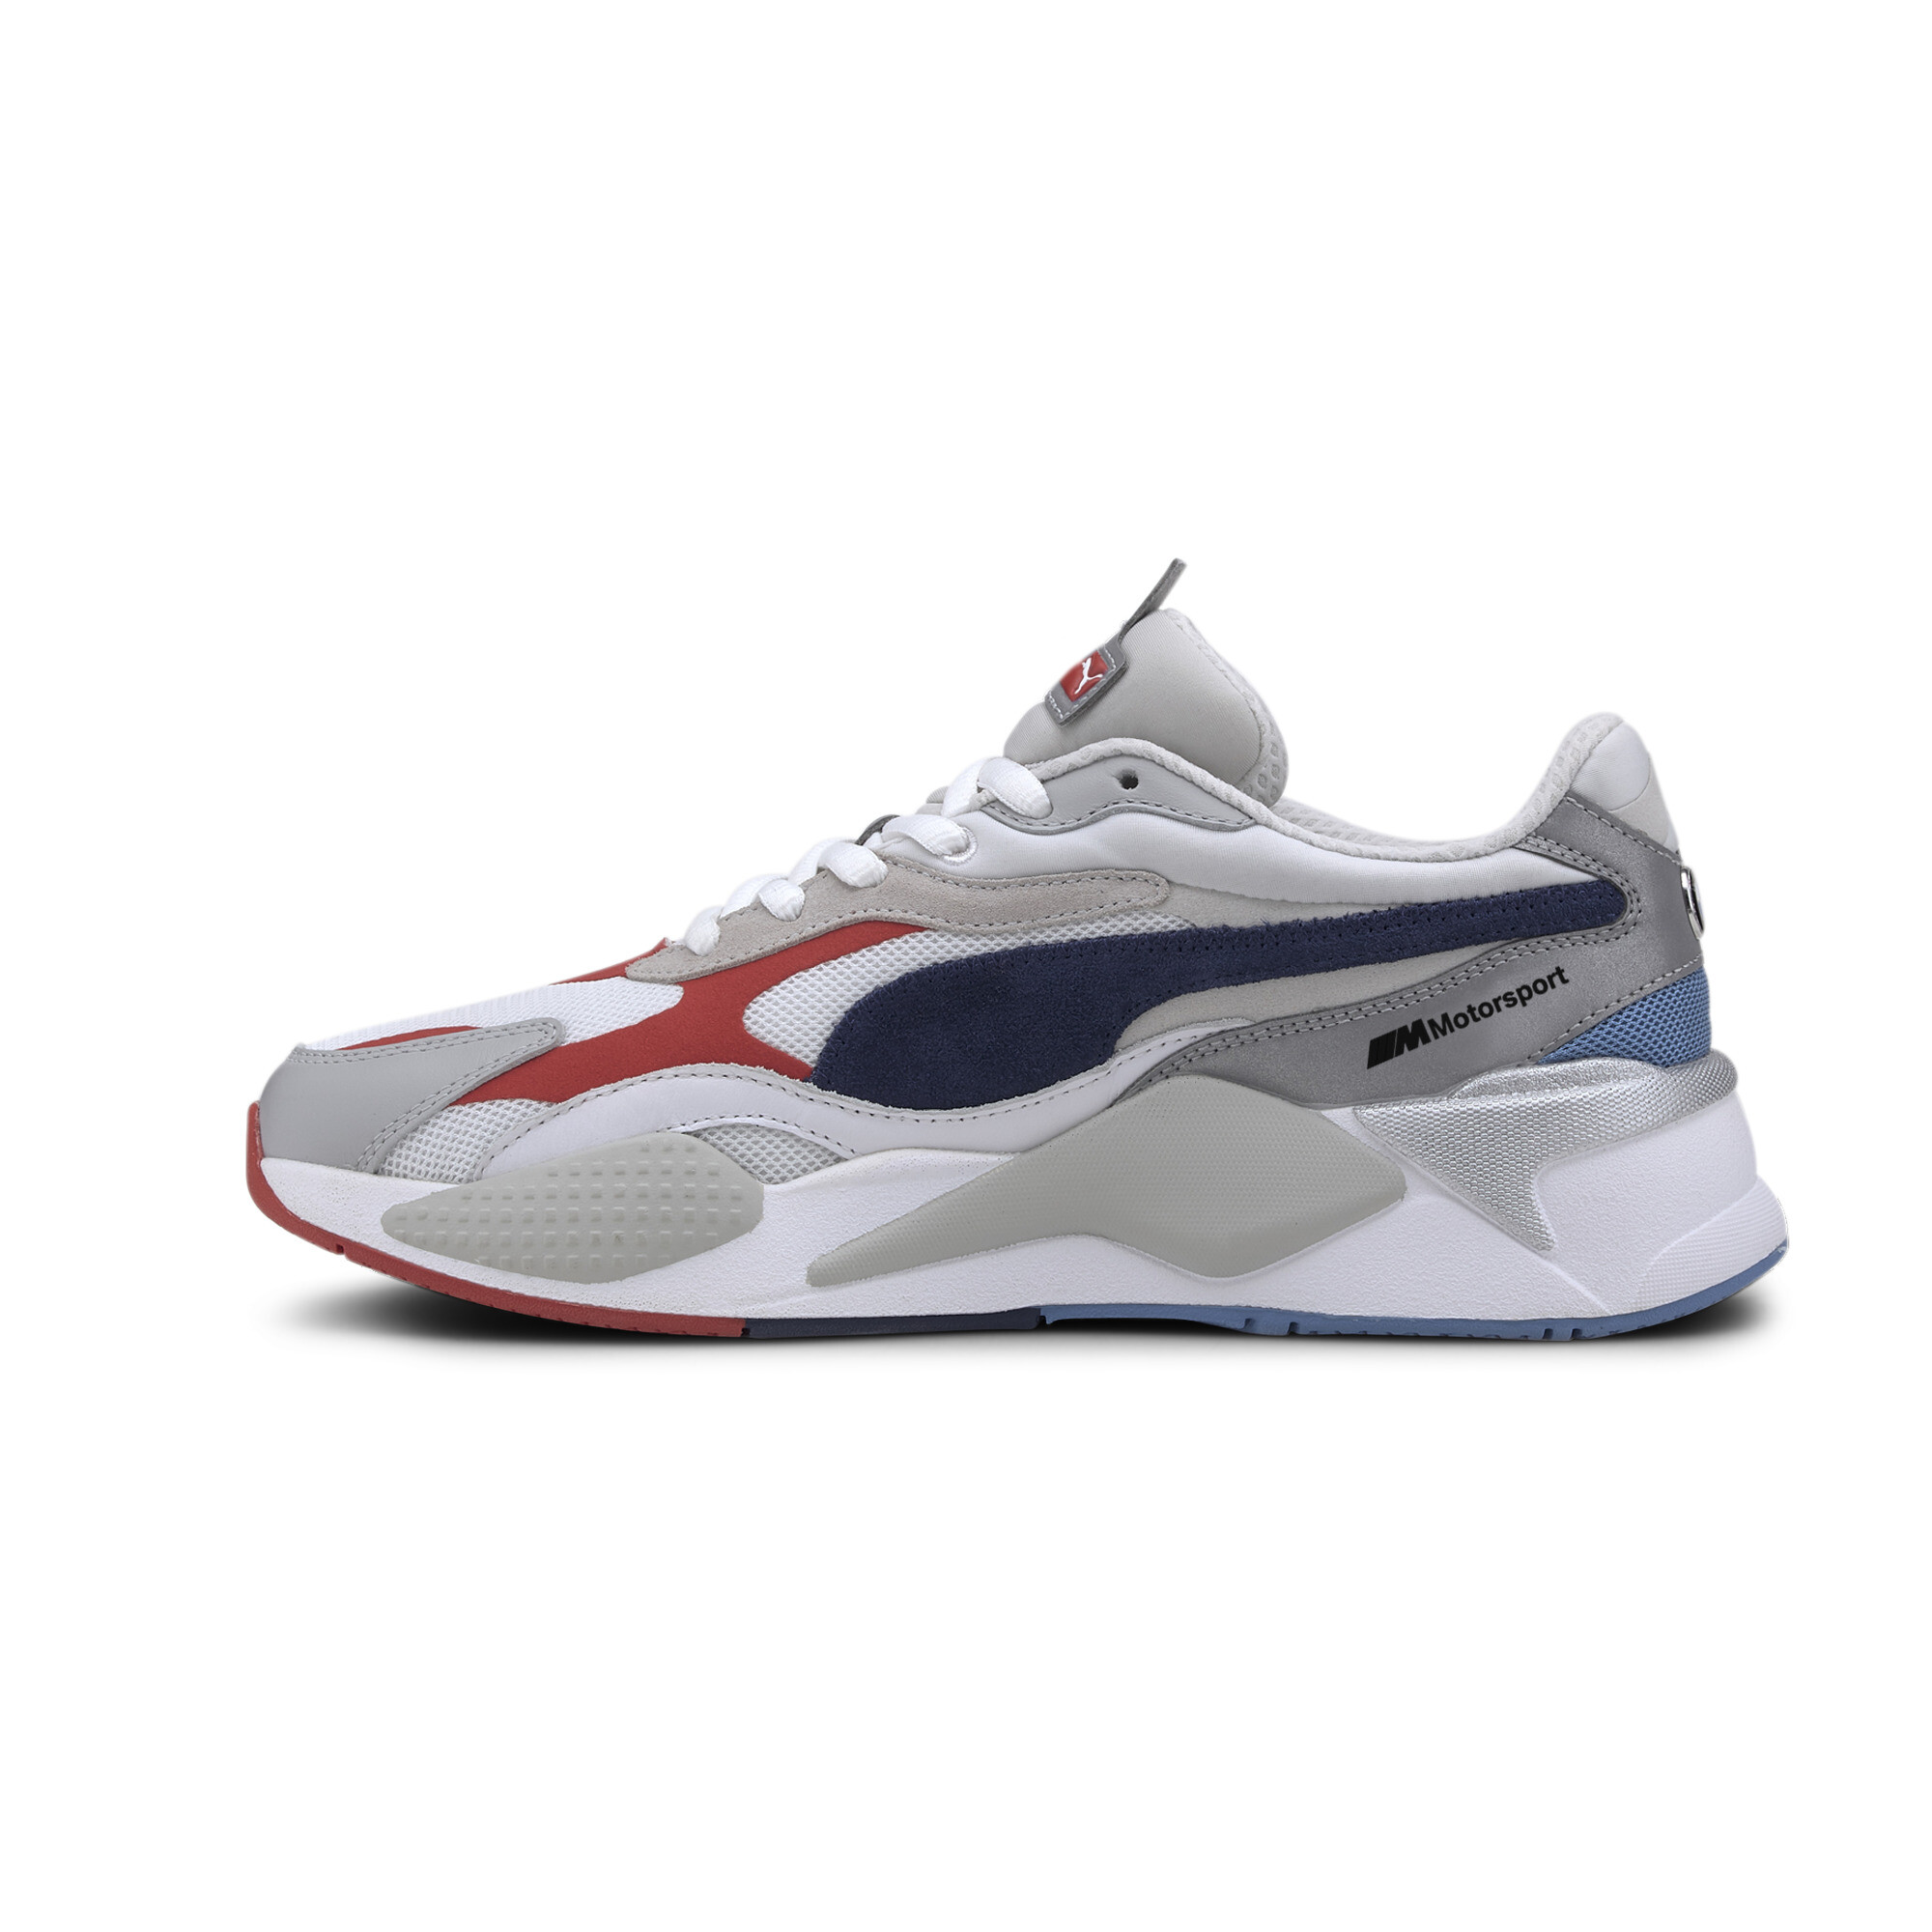 puma sneakers 2018 south africa